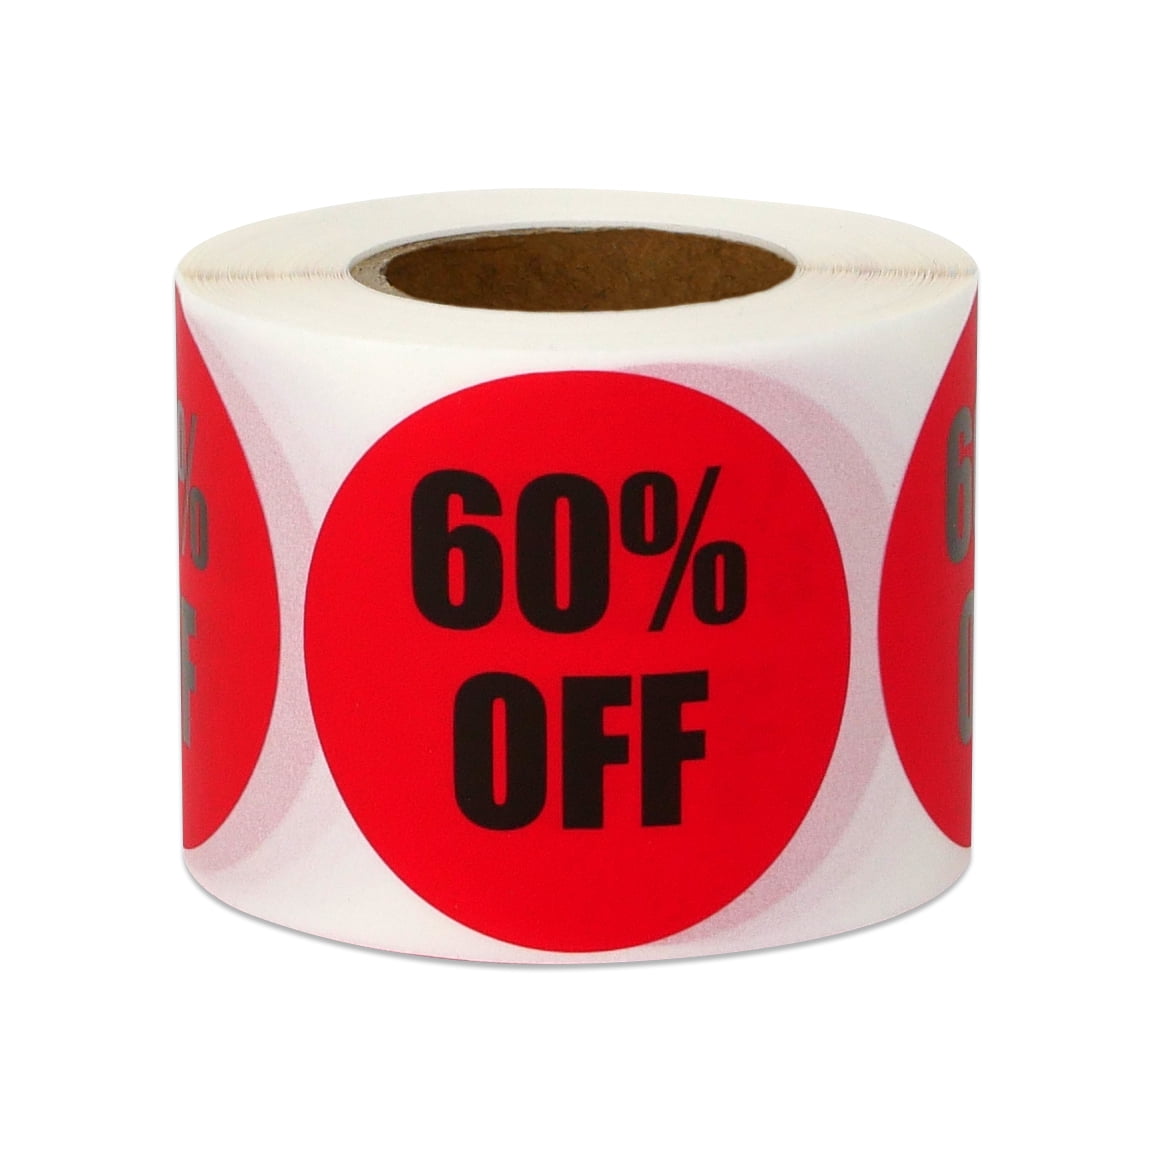 1000 Labels 1.5 Round Bright Red $5.00 Pricing Price Point Retail Stickers 1 Roll 